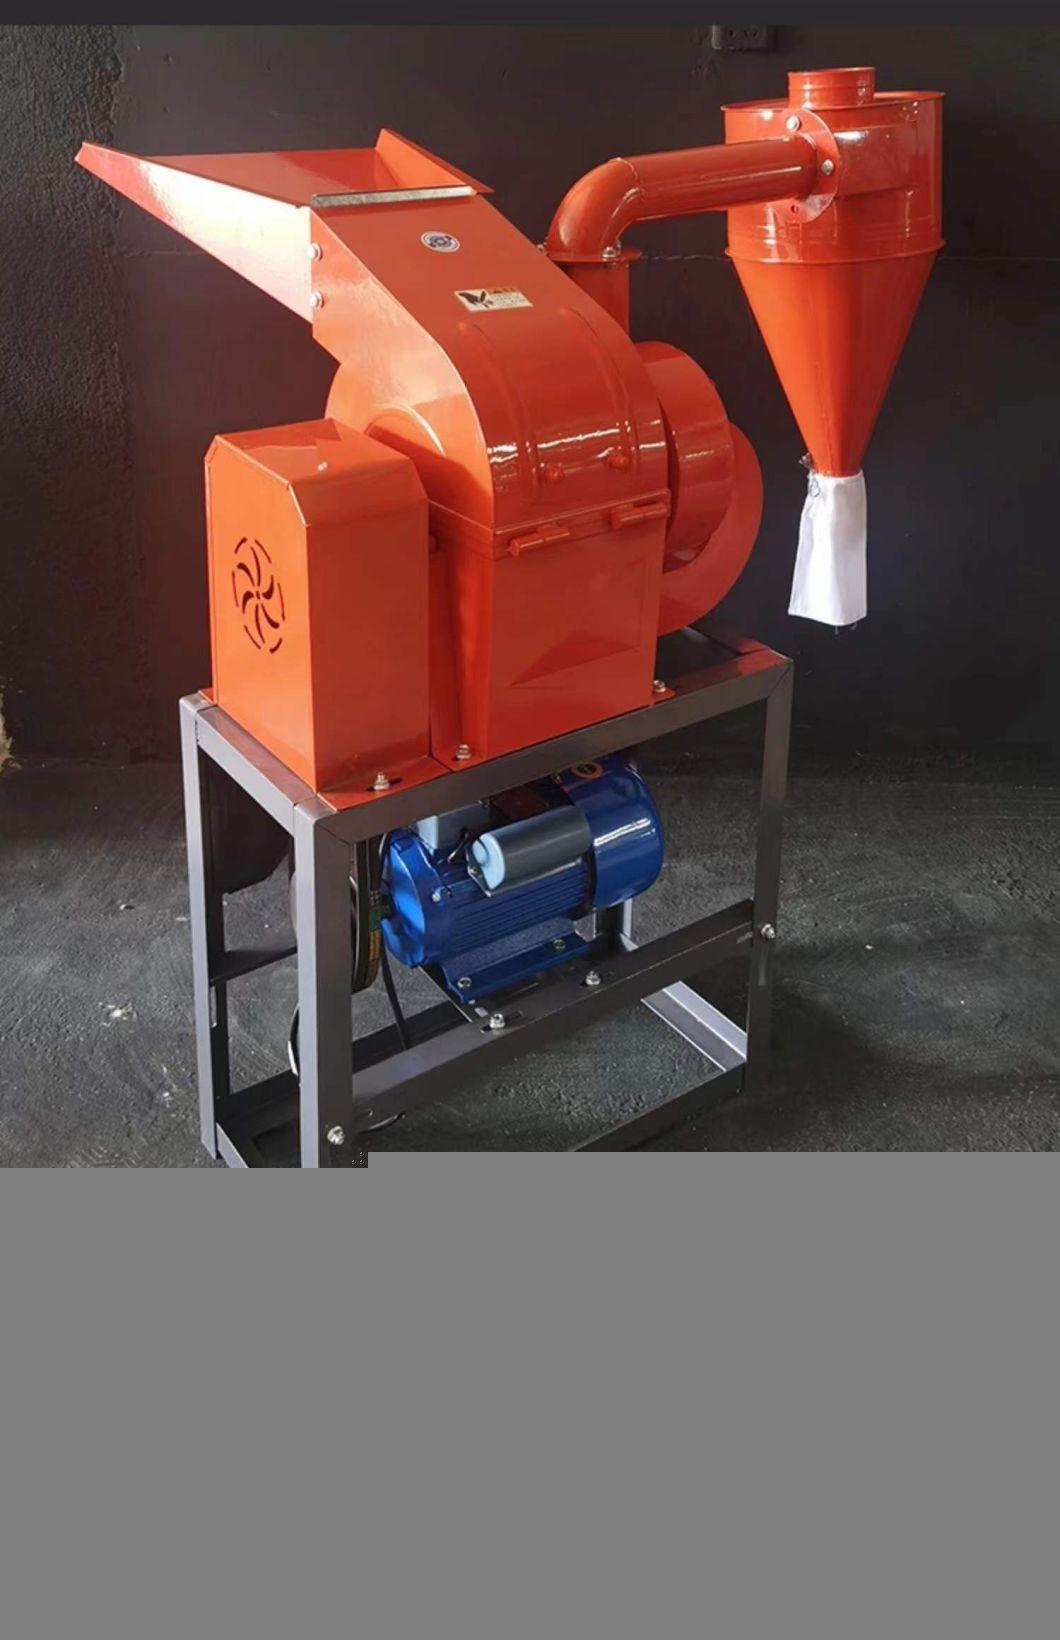 Animal Feed Hammer Mill Hot Sales Commercial Feed Mill Electric Grain Mill or Diesel Machine